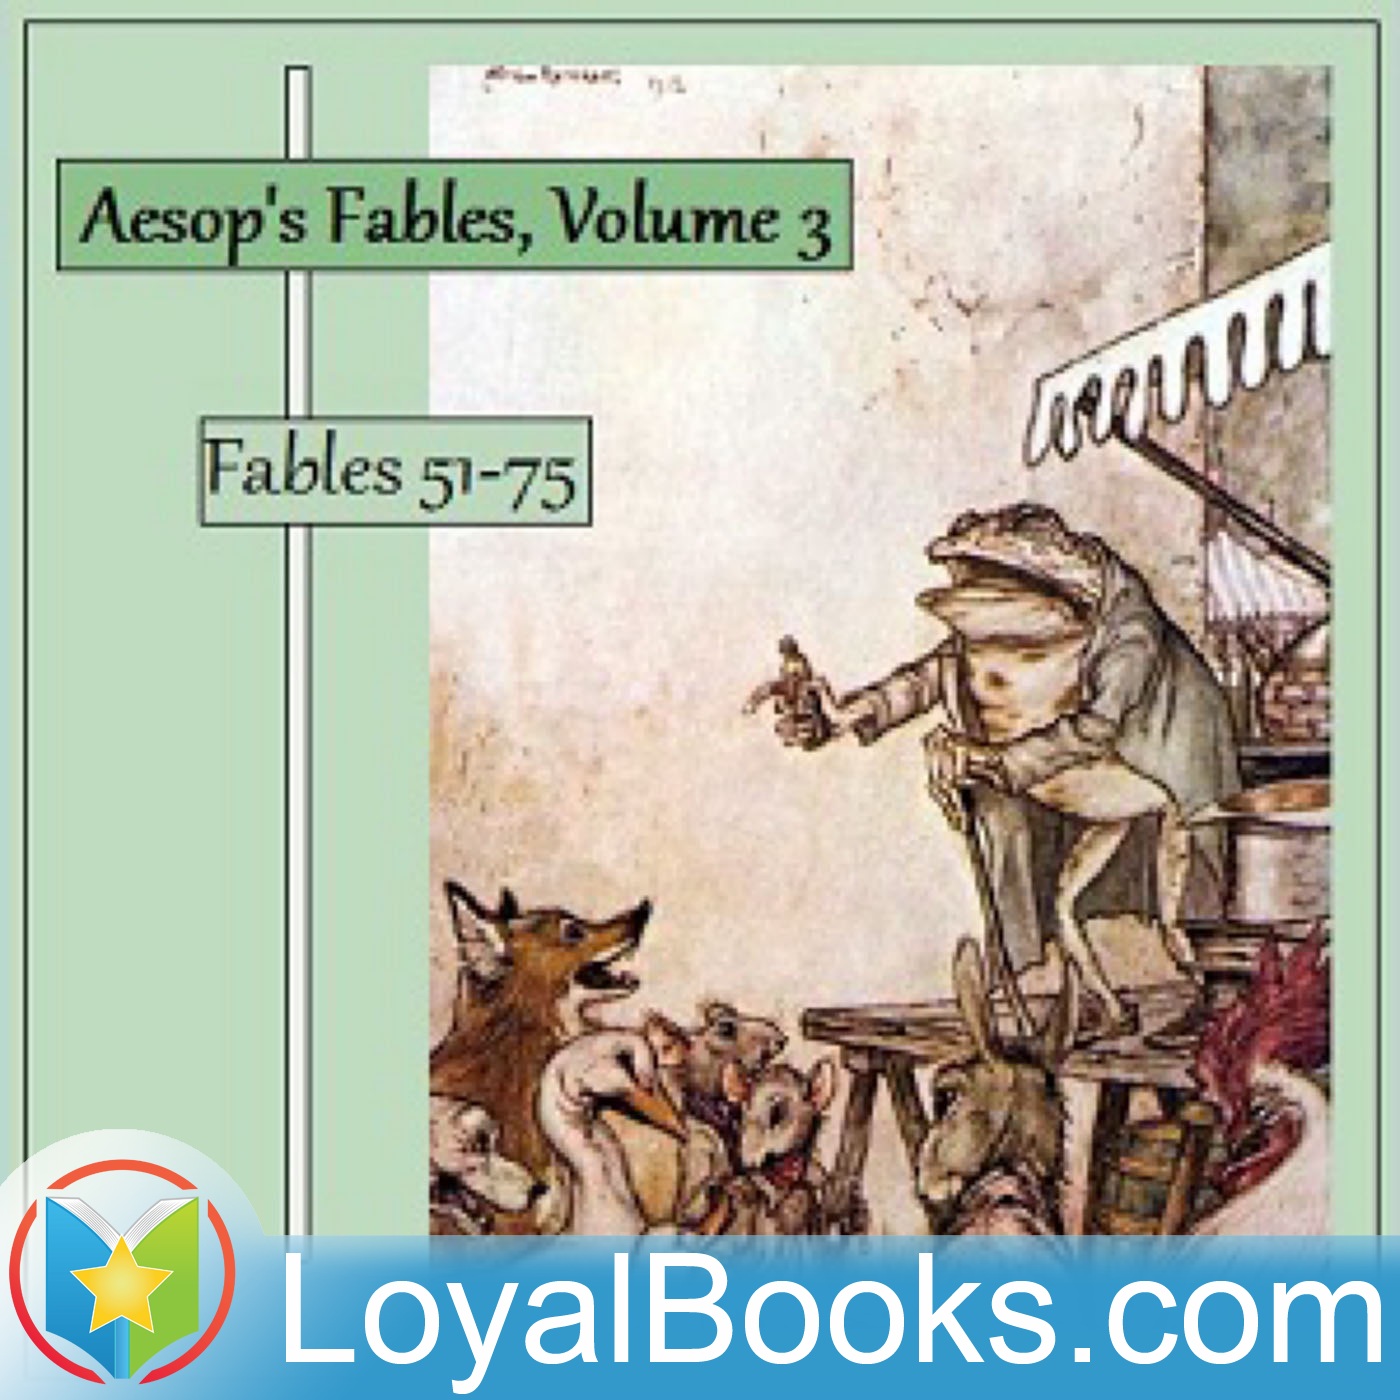 Aesop's Fables, Volume 3 (Fables 51-75) by Aesop